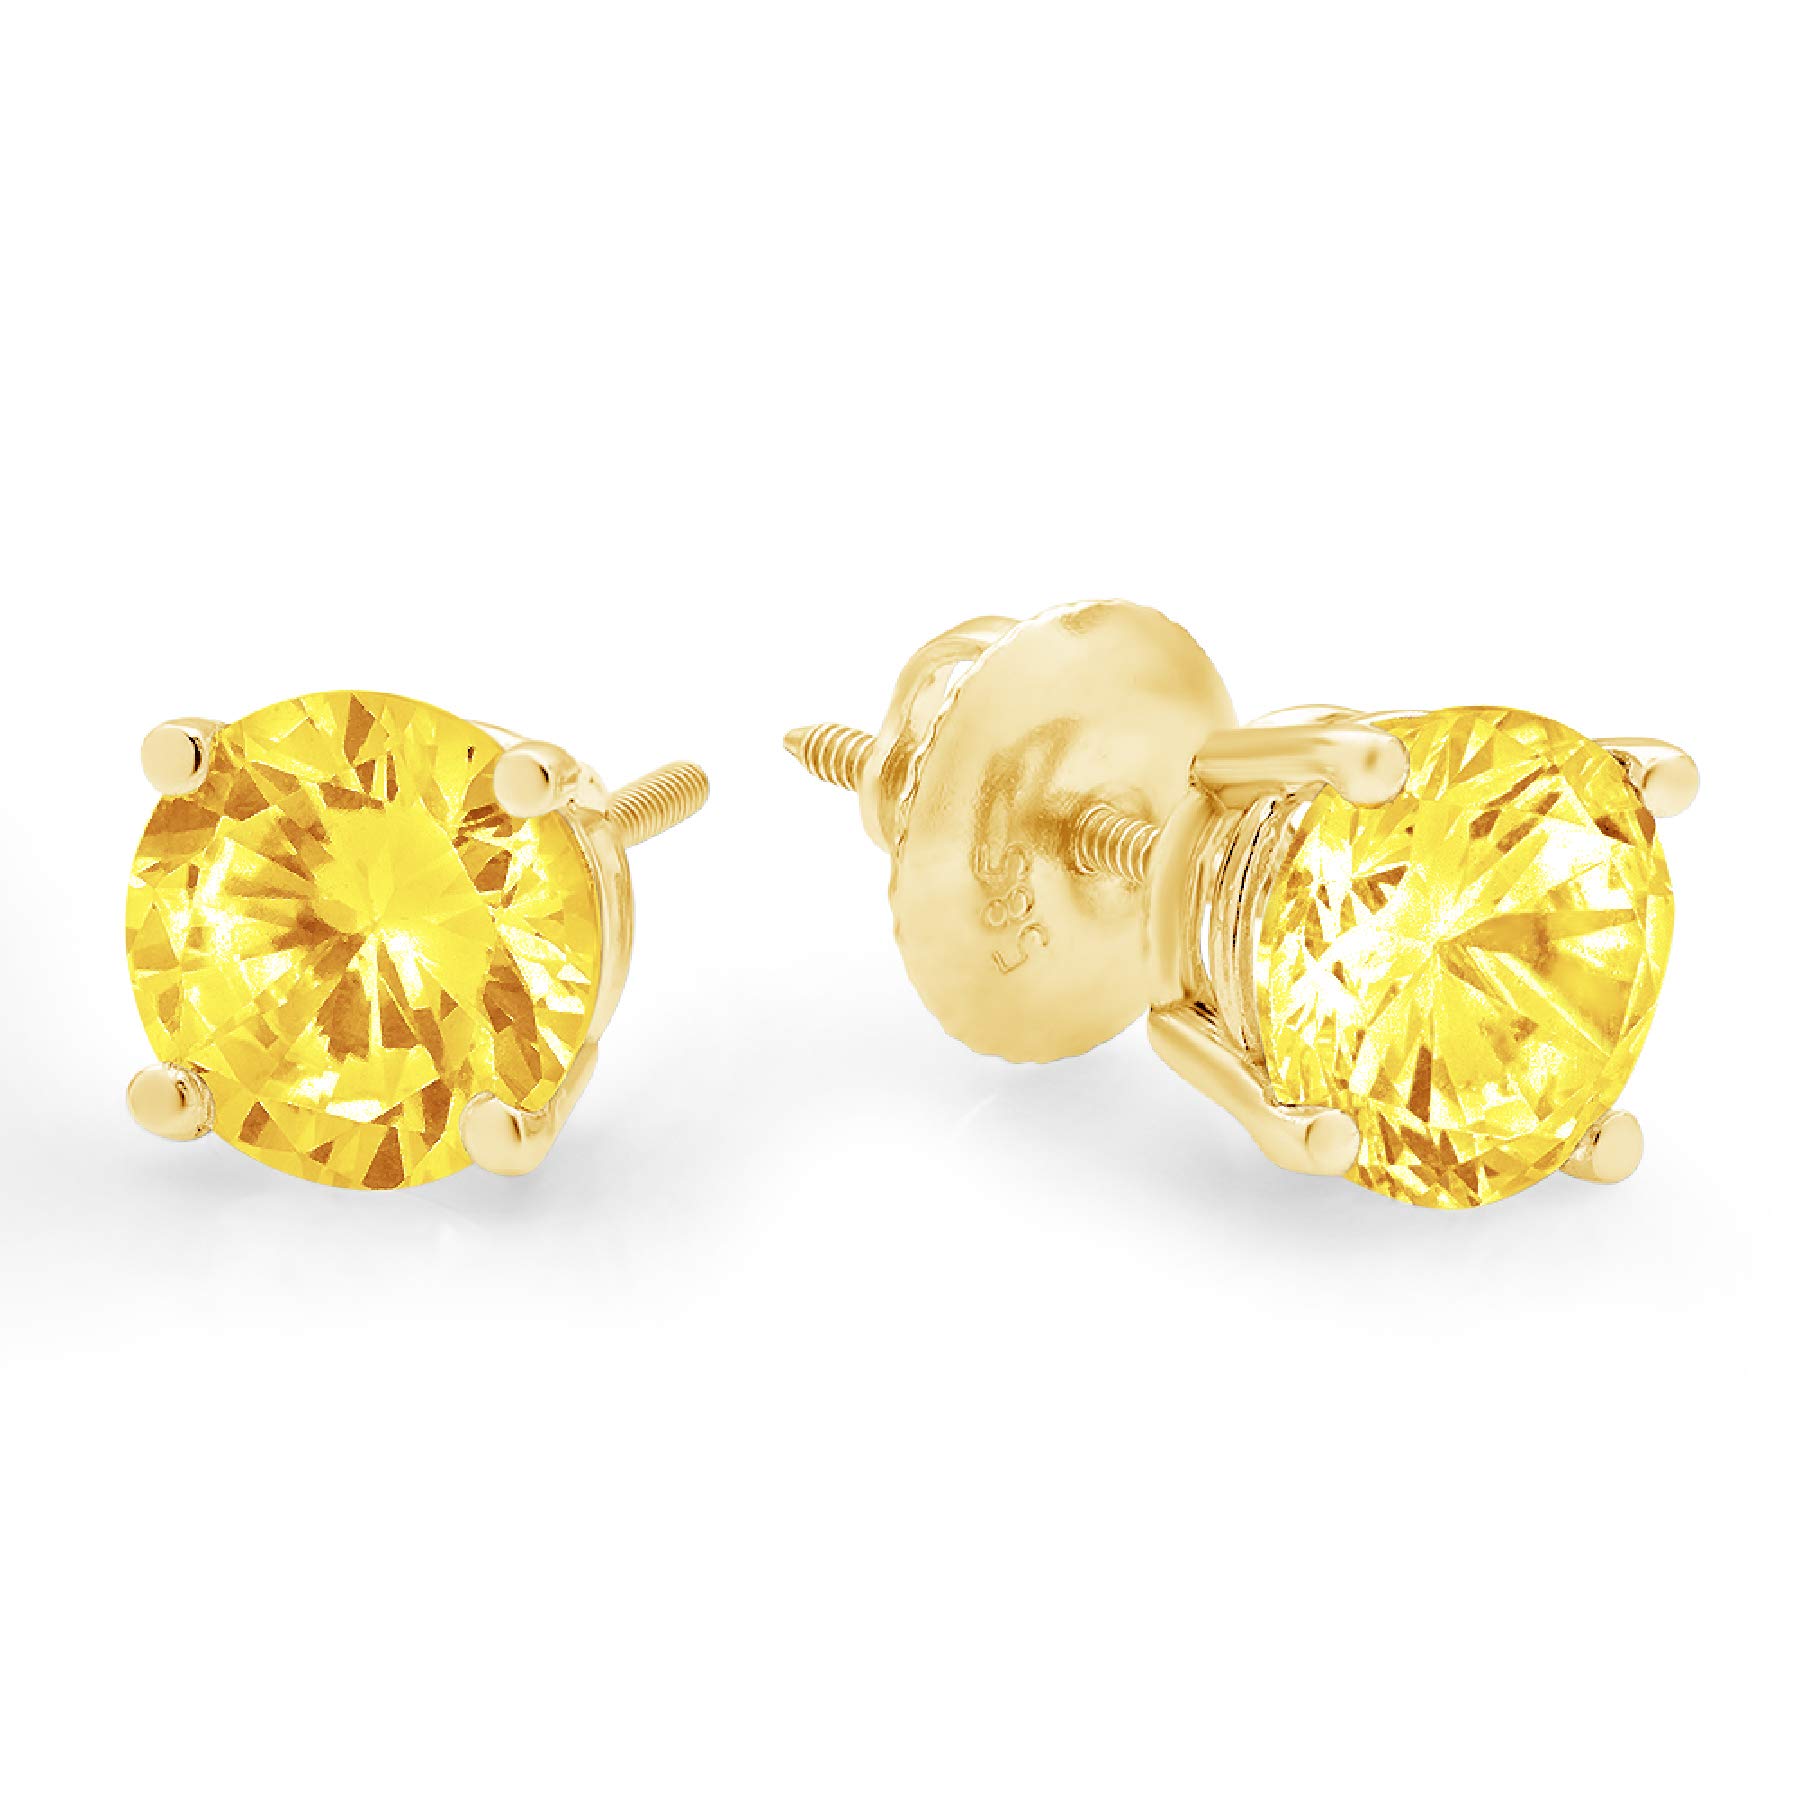 2.9ct Round Cut ideal VVS1 Conflict Free Gemstone Solitaire Canary Yellow CZ Unisex Designer Stud Earrings Solid 14k Yellow Gold Screw Back conflict free Jewelry